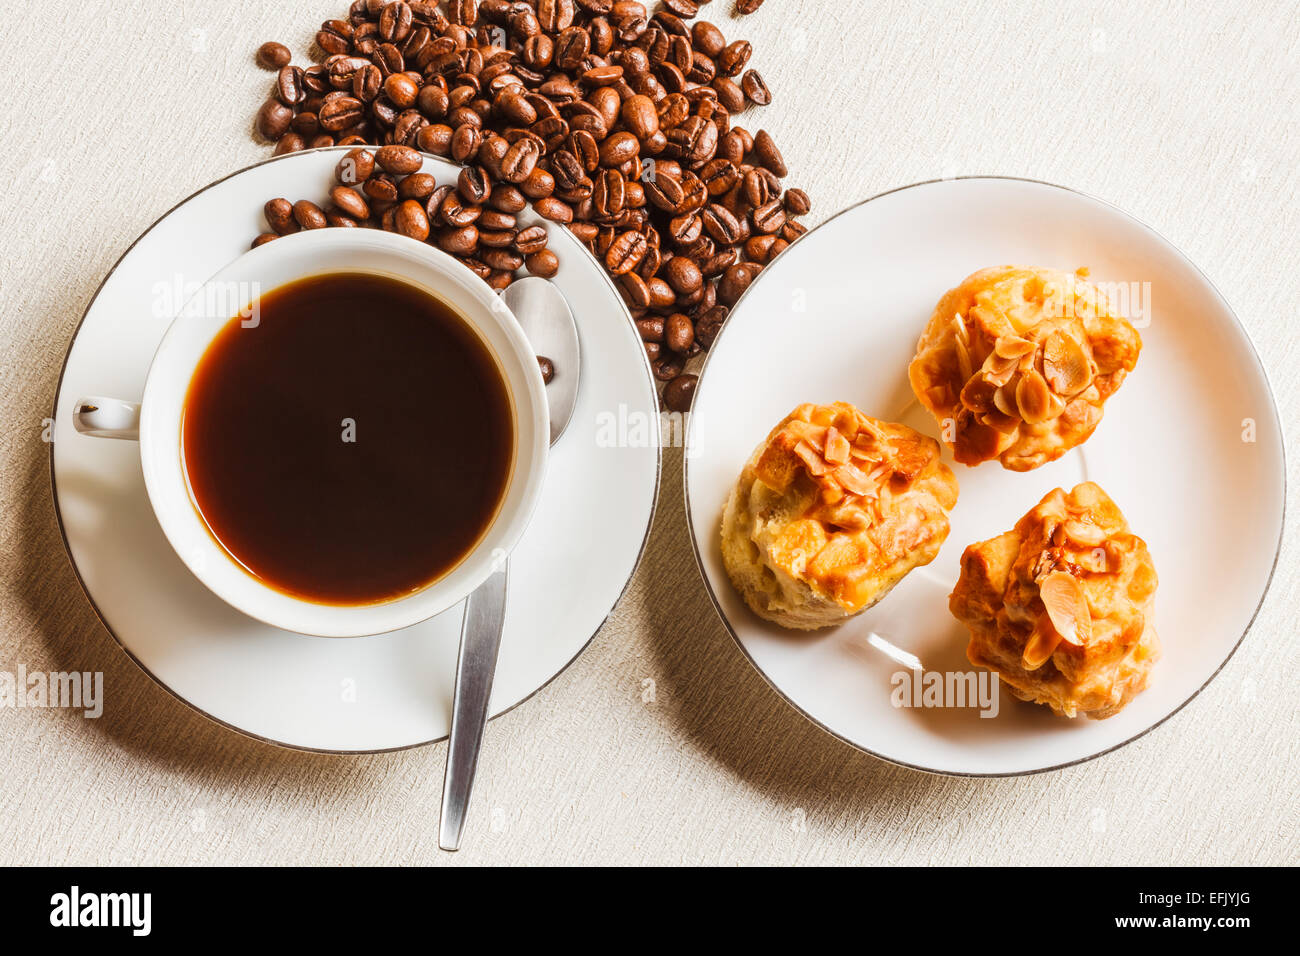 Scone bread and a cup of coffee on white plate Stock Photo